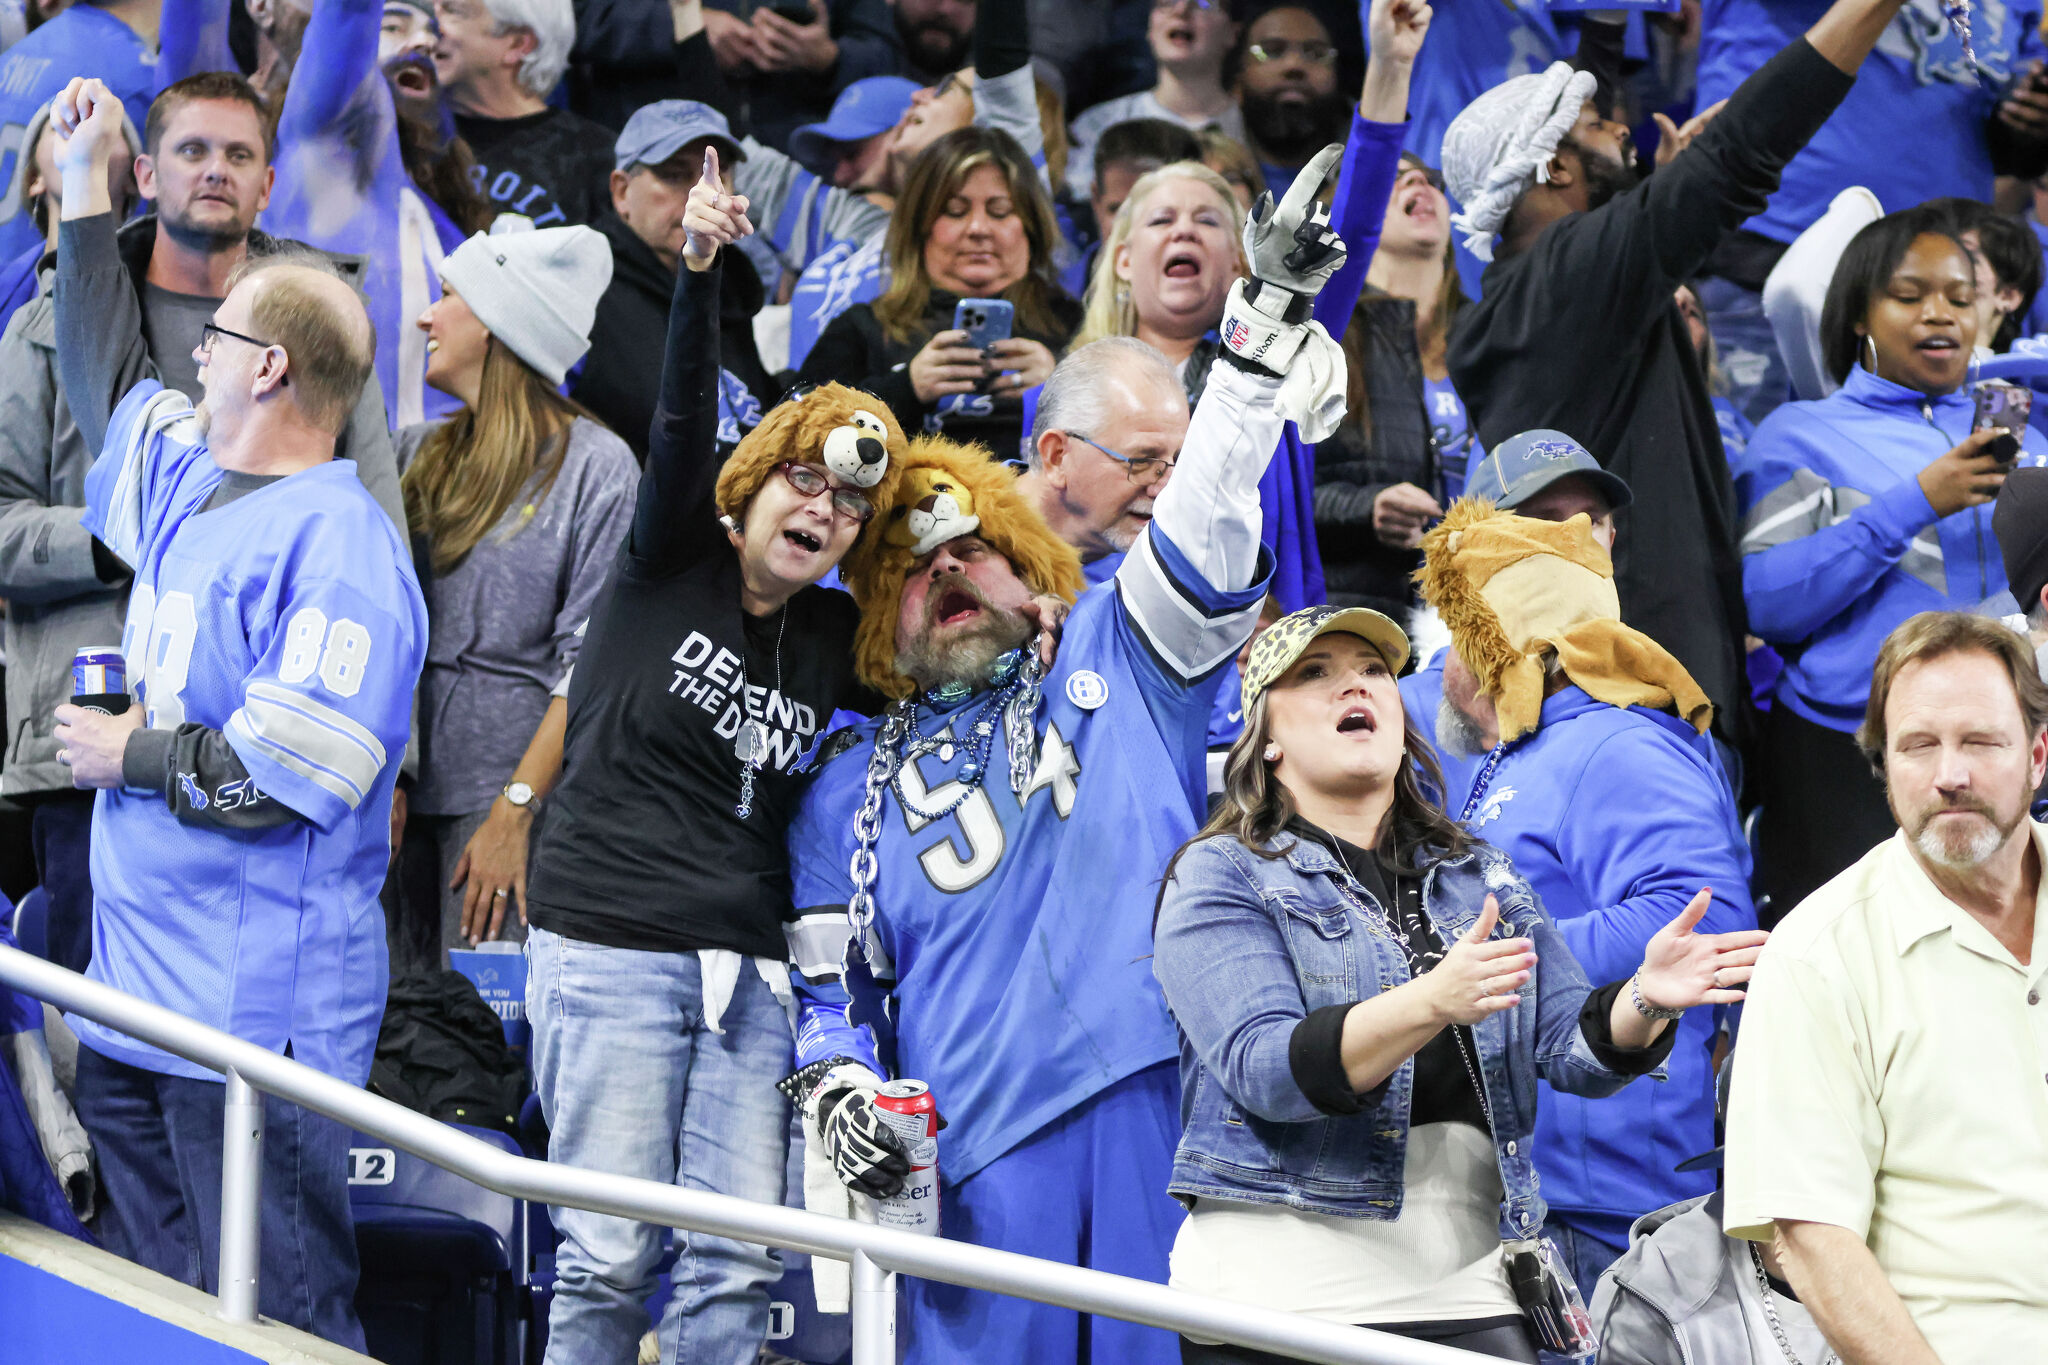 Detroit Lions The Stadium Collection store at Ford Field, home of the  News Photo - Getty Images